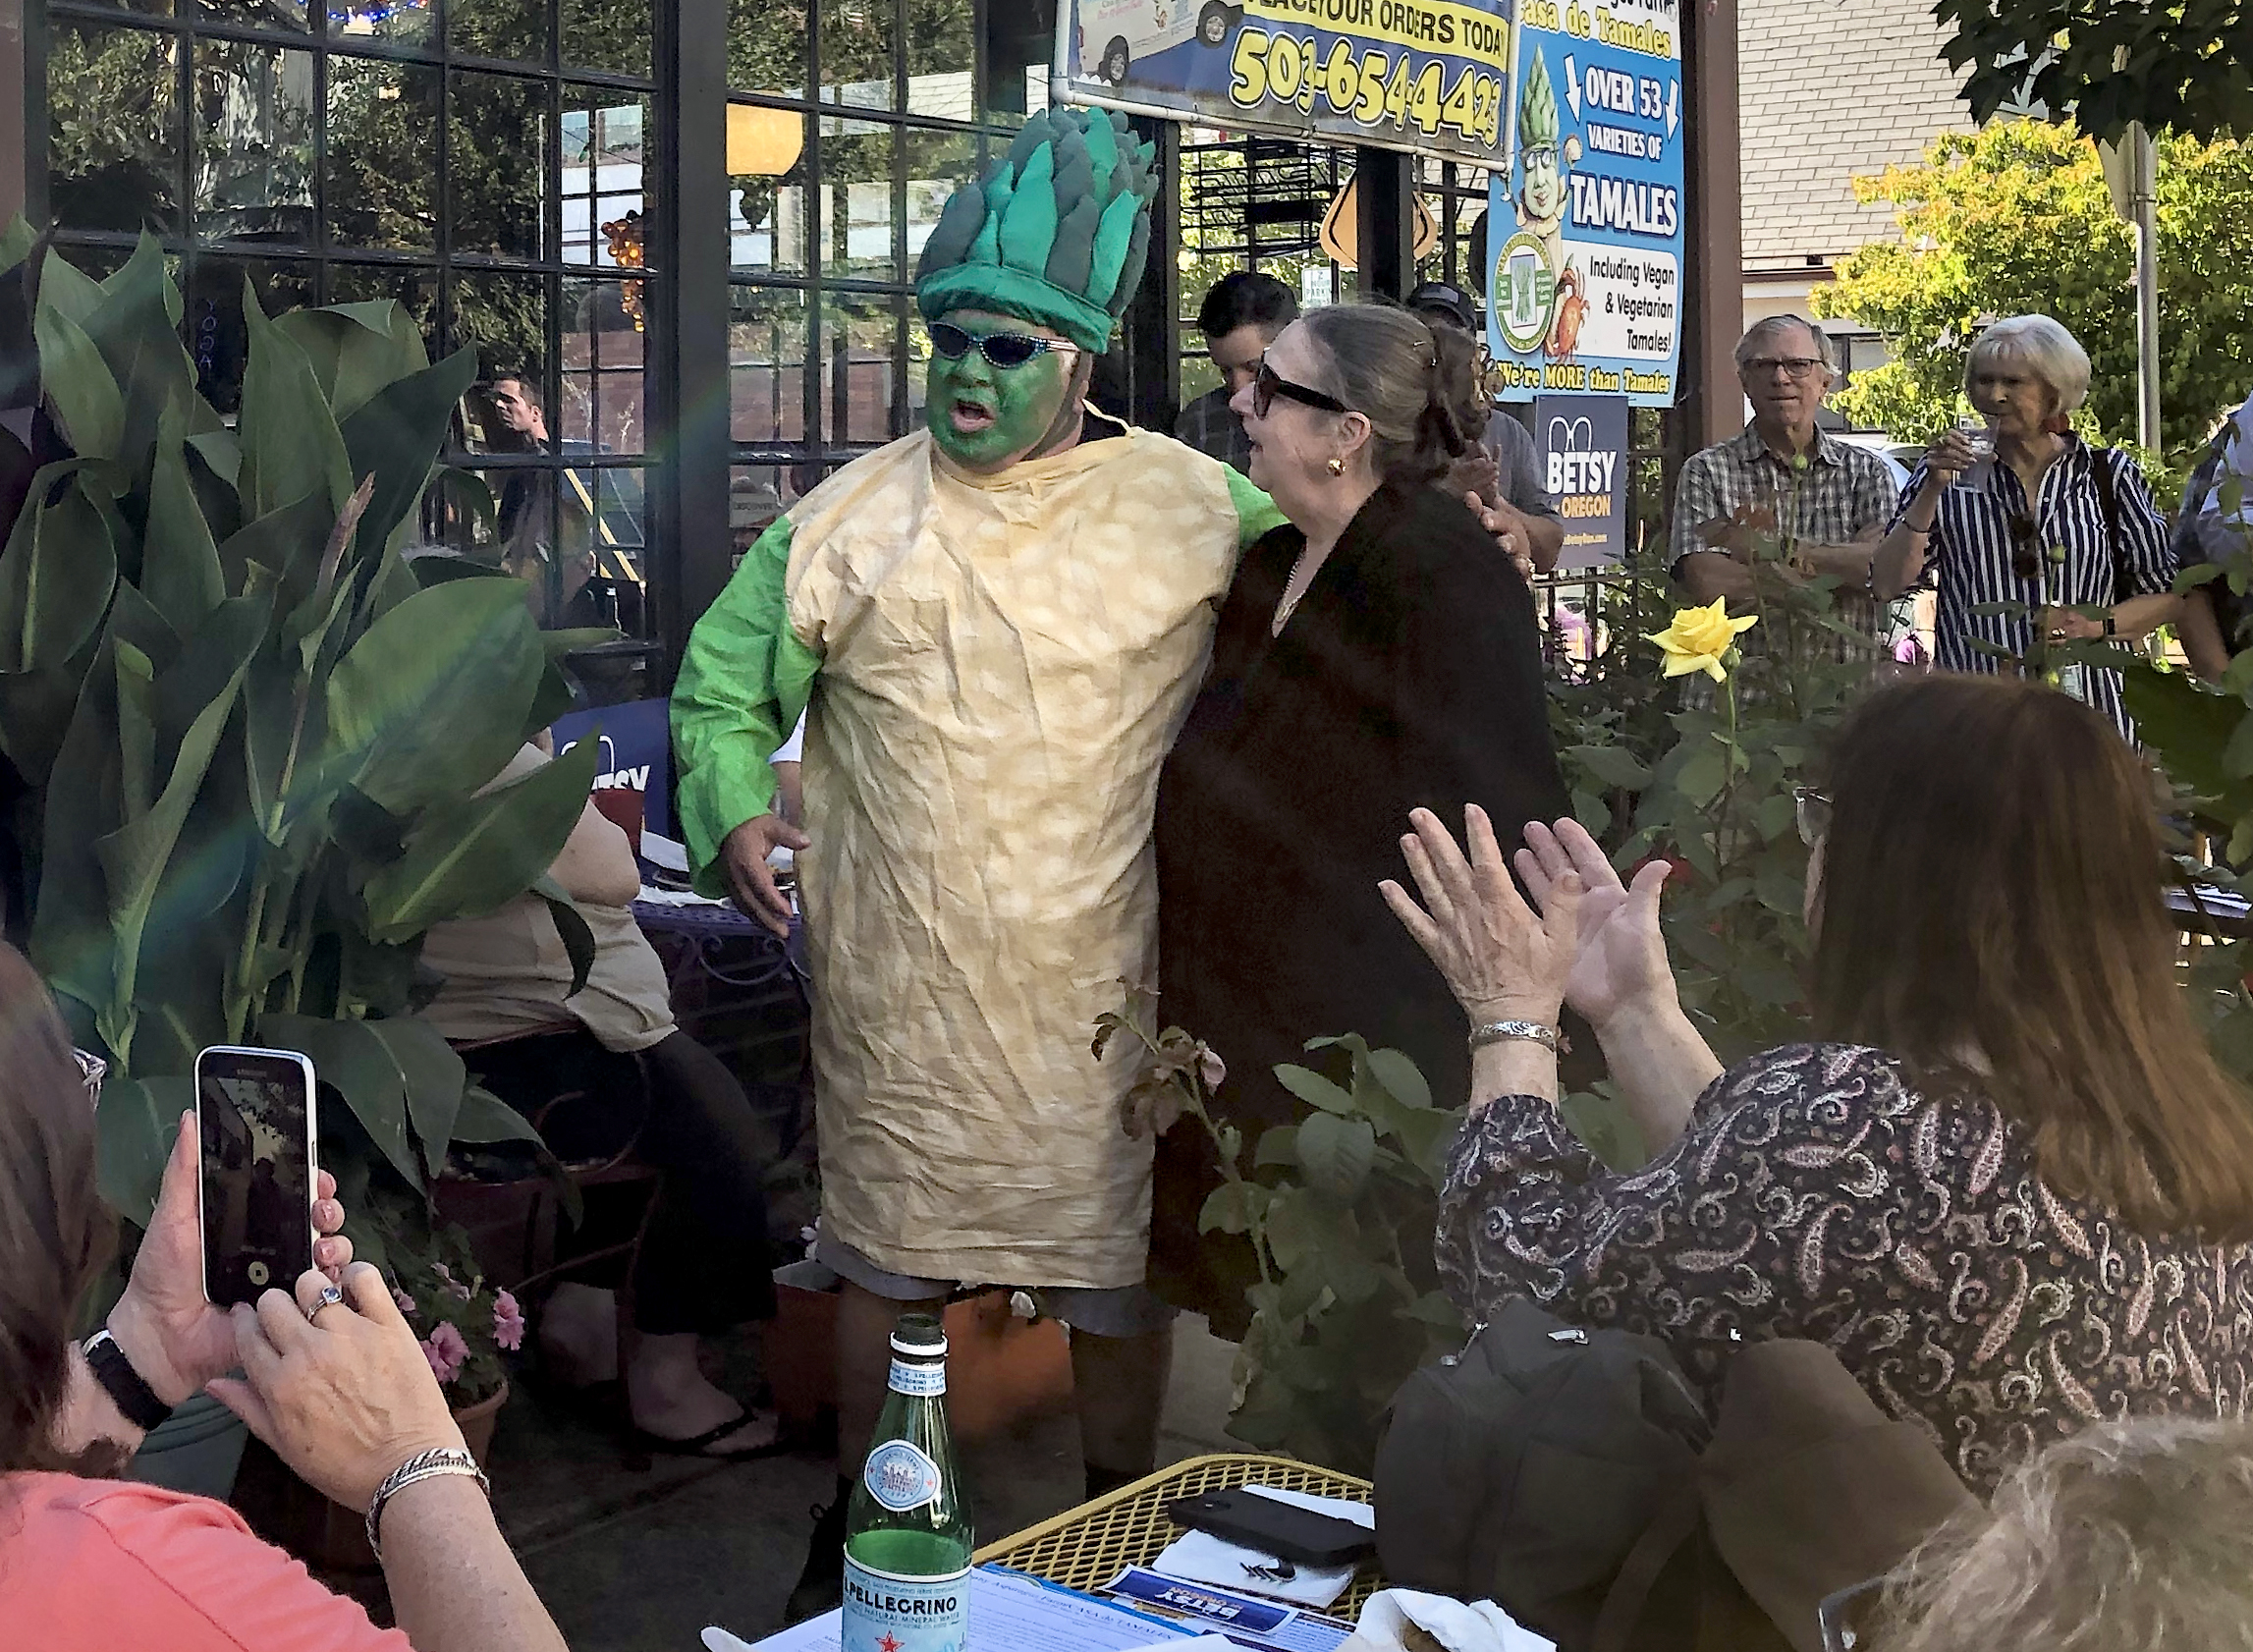 Betsy Johnson poses with Charles Maes, who is dressed like a stalk of asparagus. Maes' Milwaukie restaurant, Casa de Tamales, hosted an event for Johnson on July 7, 2022.